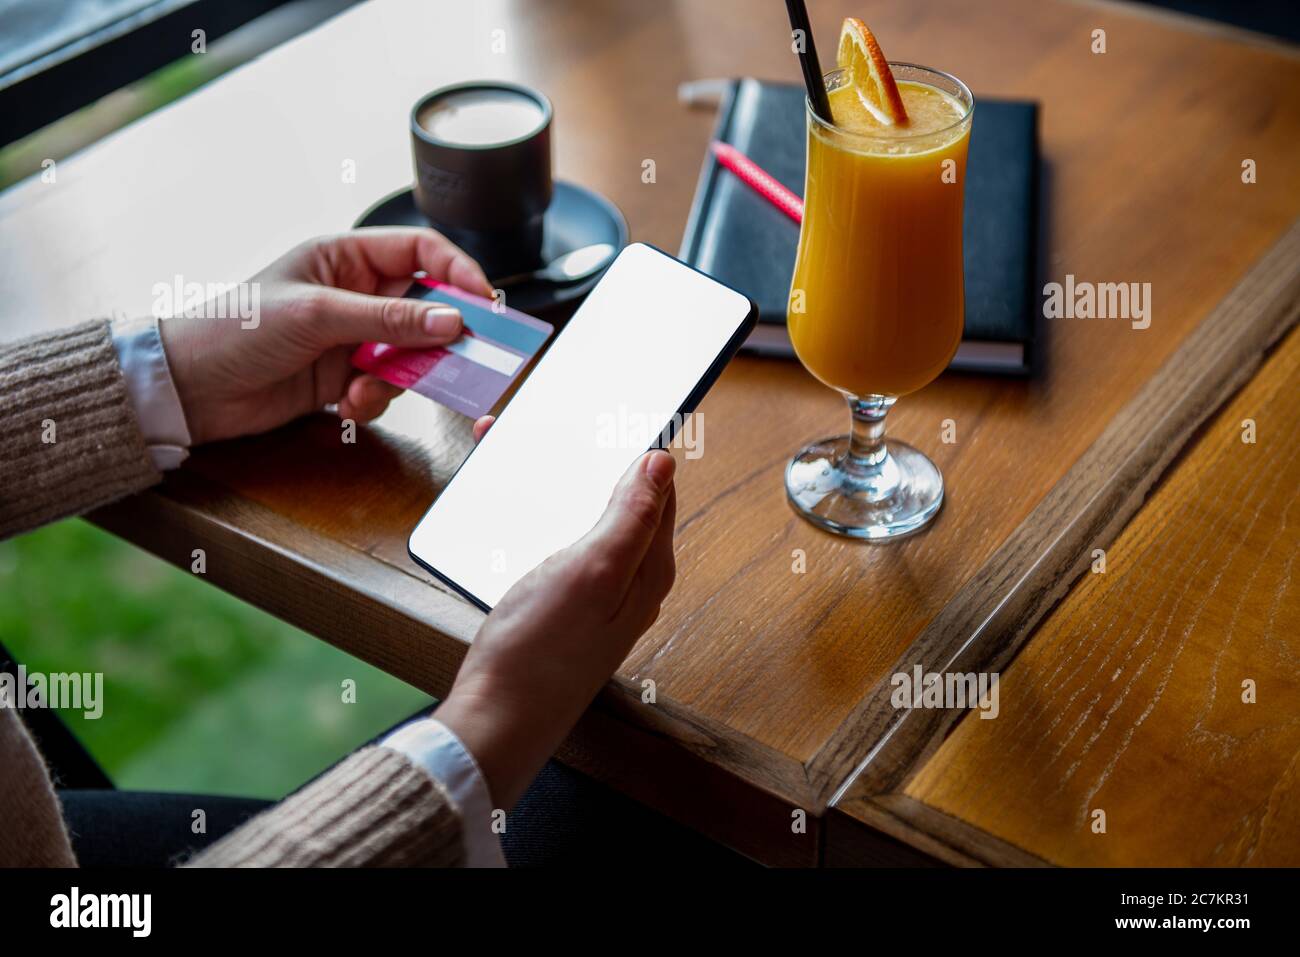 Online shopping , internet concept. Woman using credit card and blank smartphone at cafe. Stock Photo